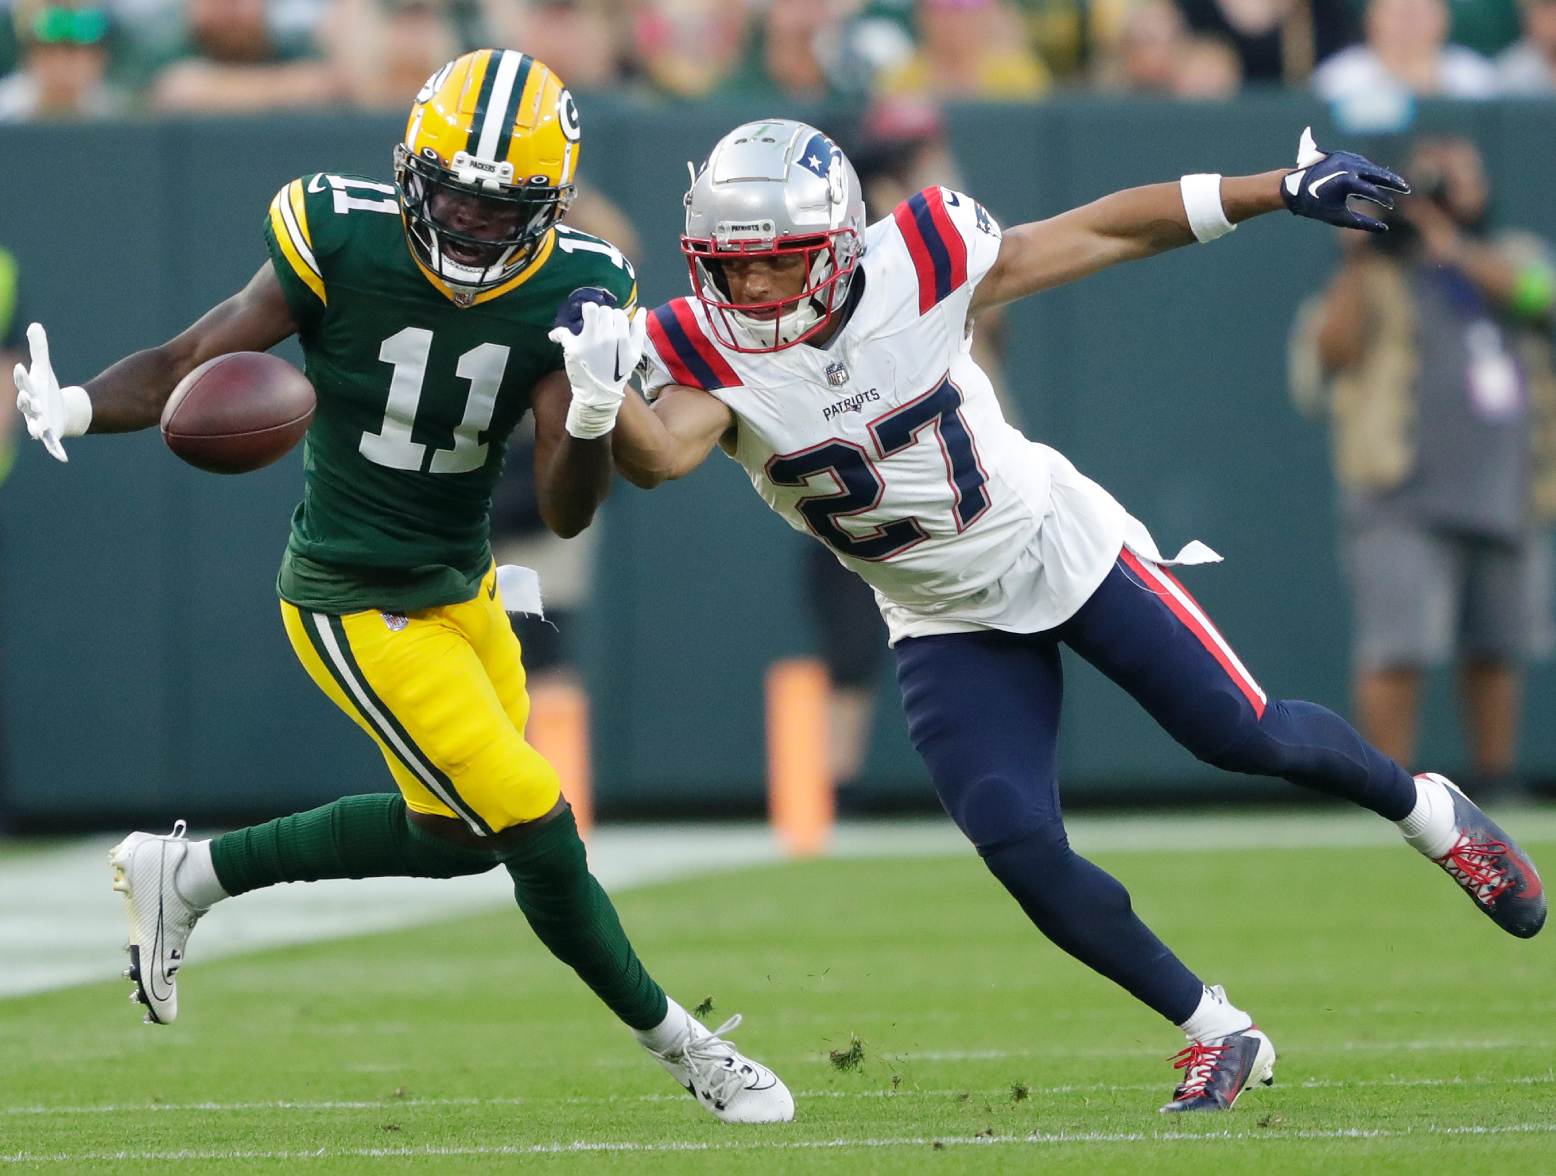 Aug 19, 2023; Green Bay, WI, USA;   New England Patriots cornerback Myles Bryant (27) breaks up a pass intended for Green Bay Packers wide receiver Jayden Reed (11) during their preseason football game at Lambeau Field. Credit: Tork Mason-USA TODAY Sports